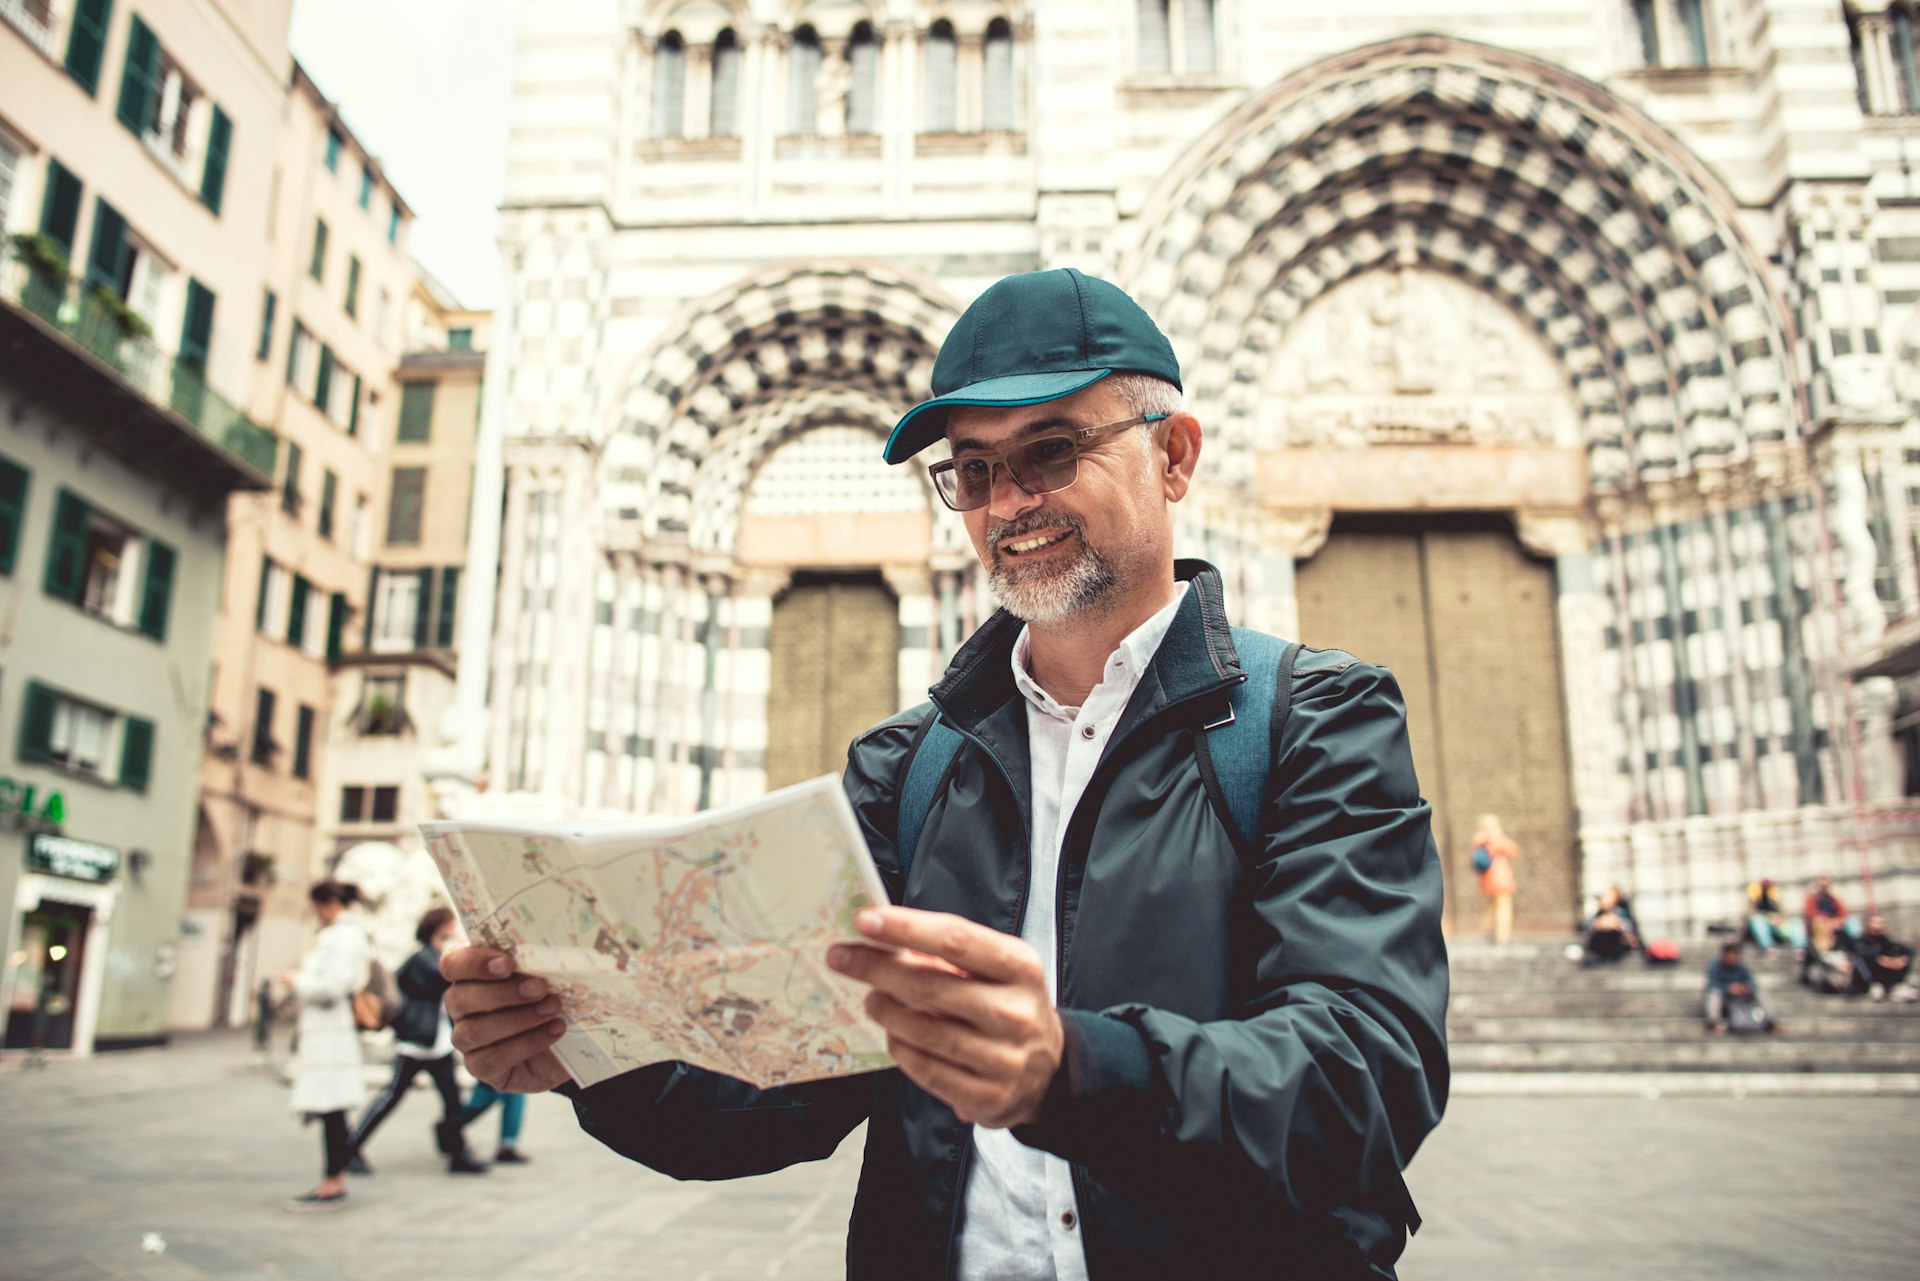 A man reading a map in front of the Cattedrale San Lorenzo in Genoa